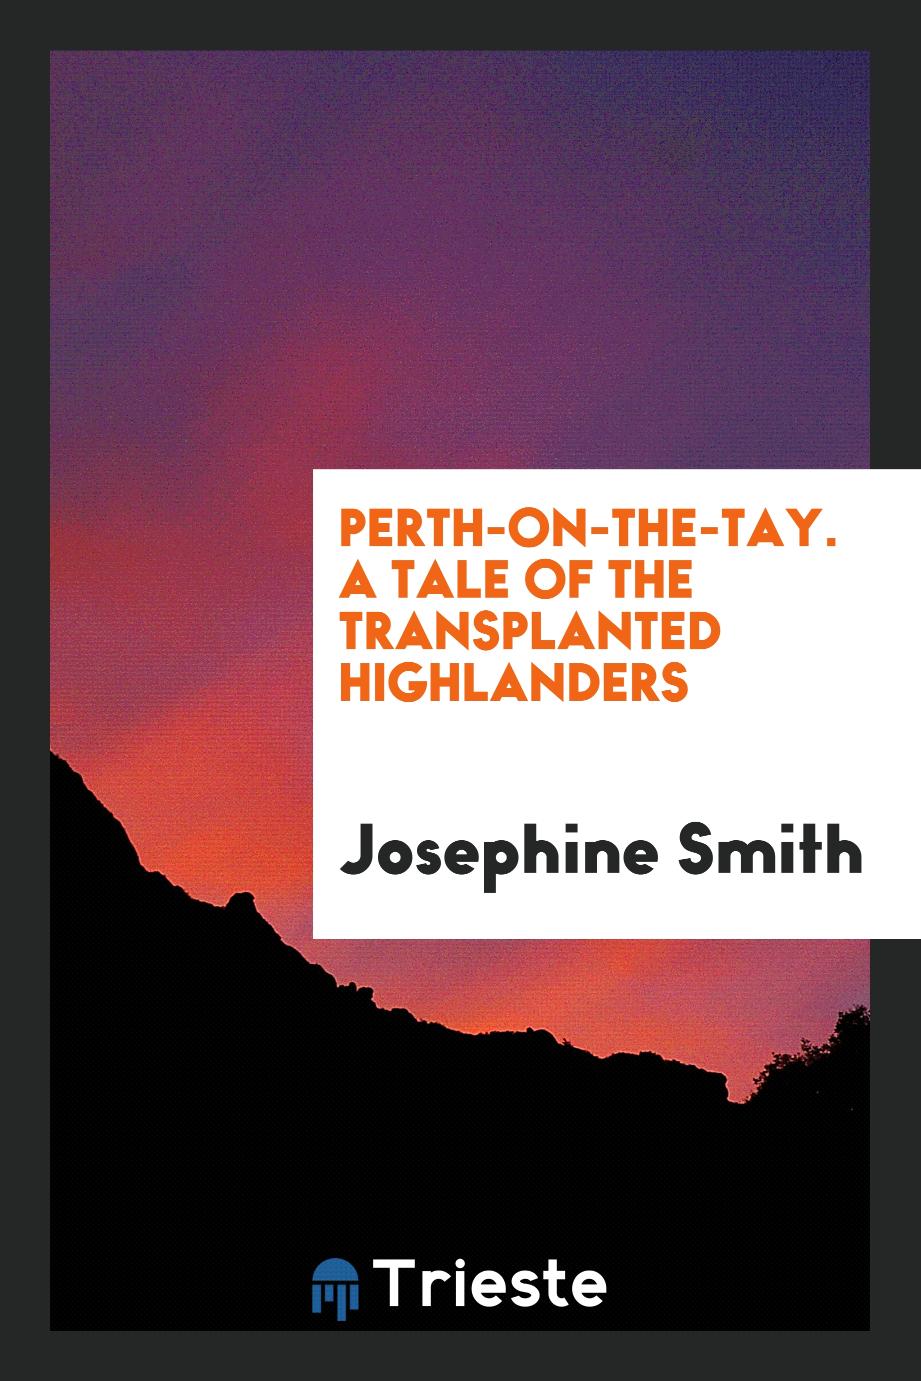 Perth-on-the-Tay. A Tale of the Transplanted Highlanders